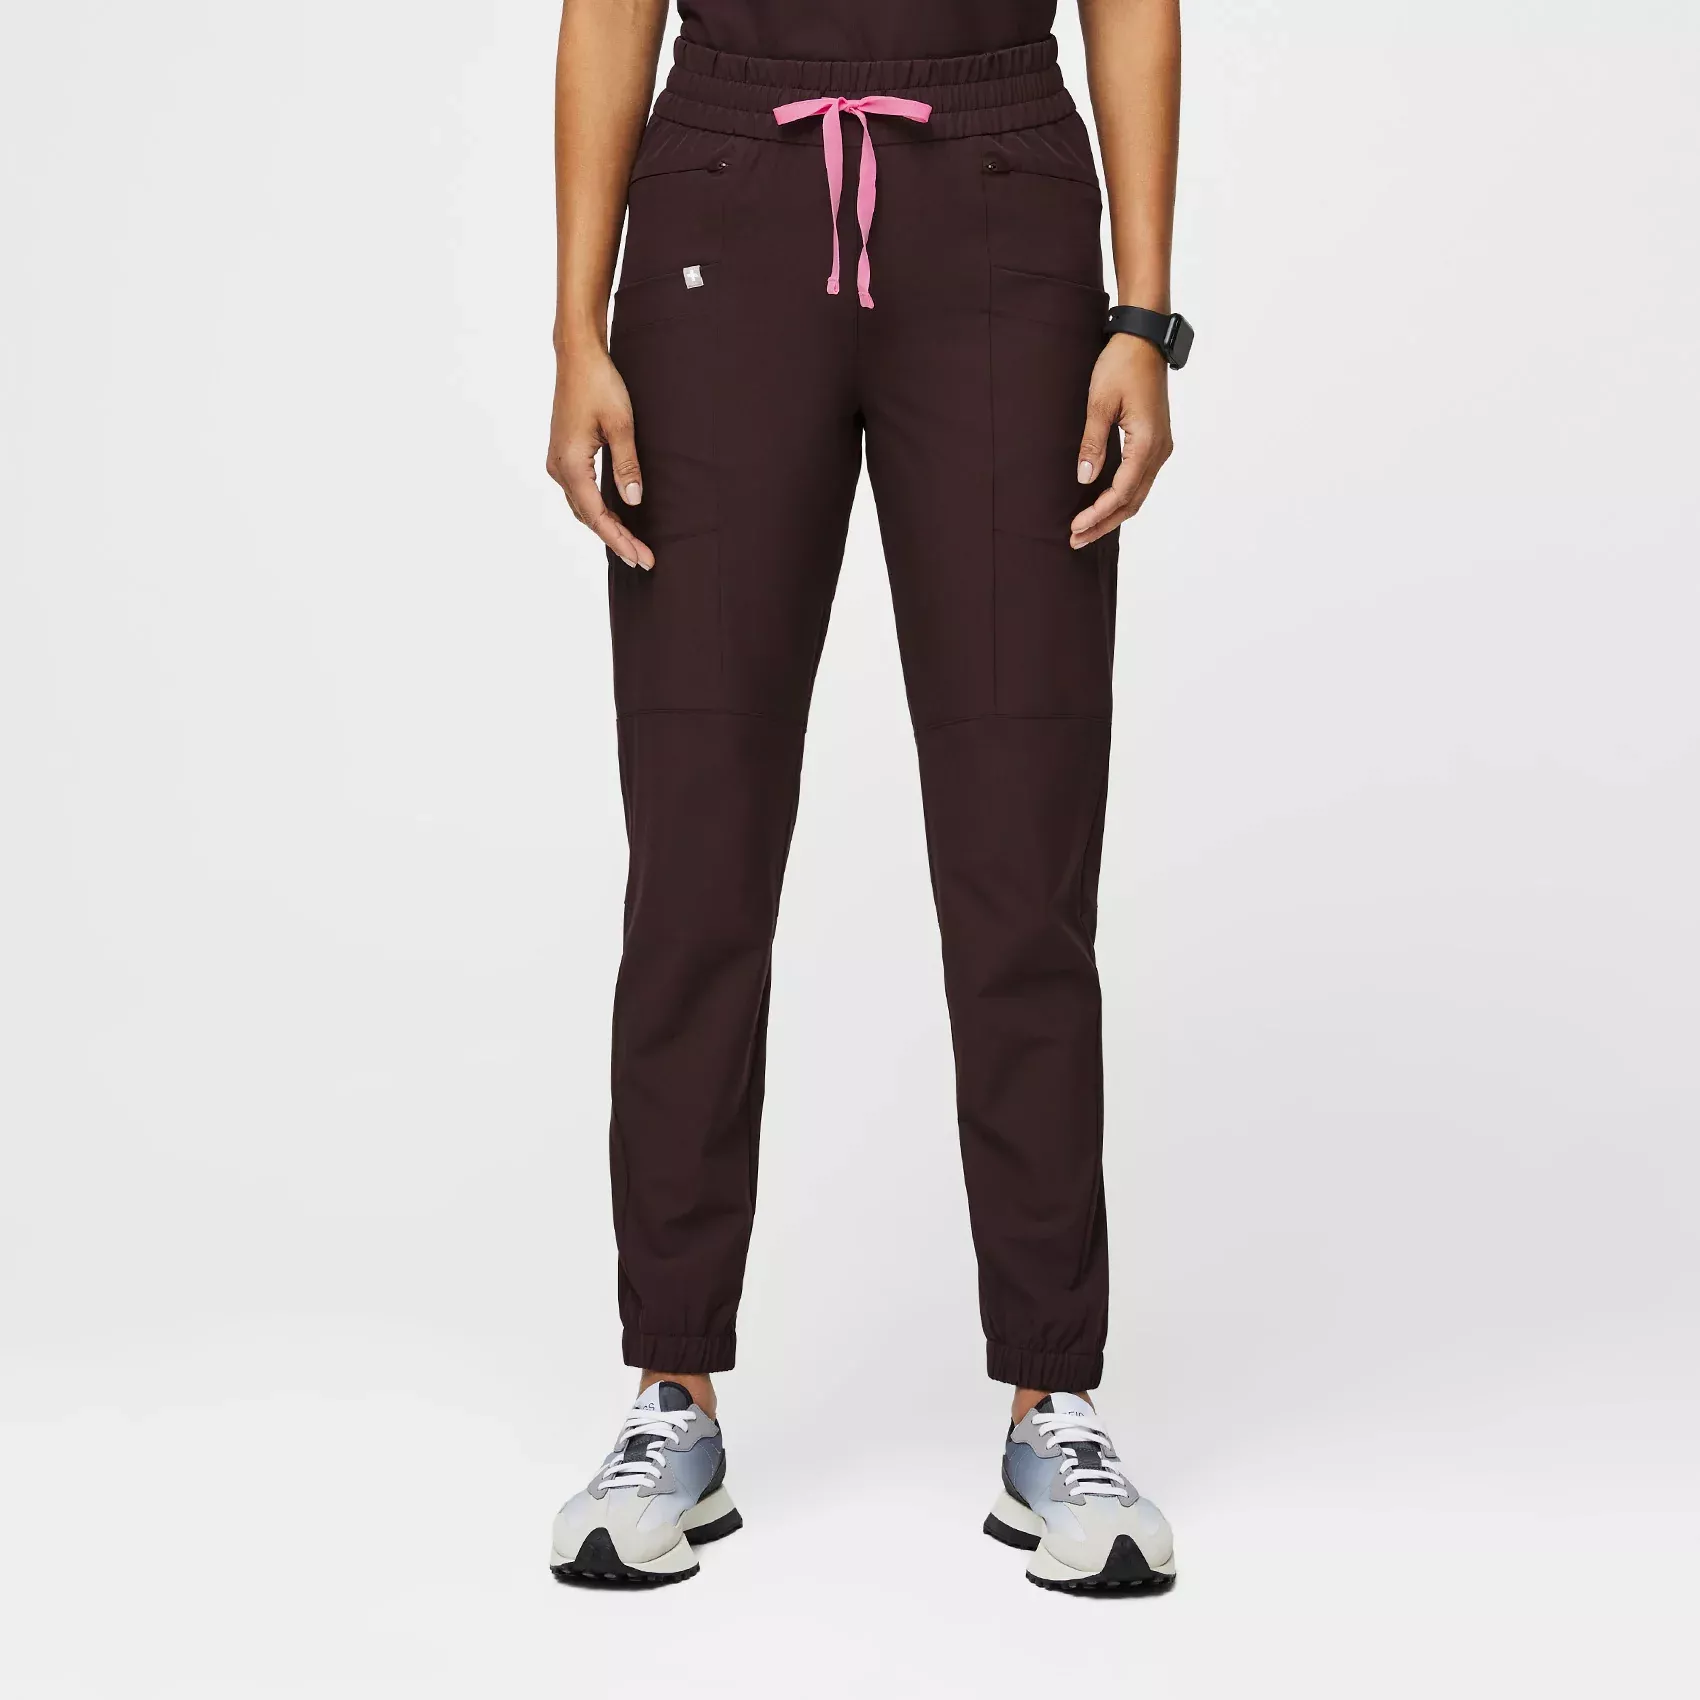 FIGS I am begging for scrub pants meant for curvy girls 🙏#figs #figs, Fabletics Scrubs